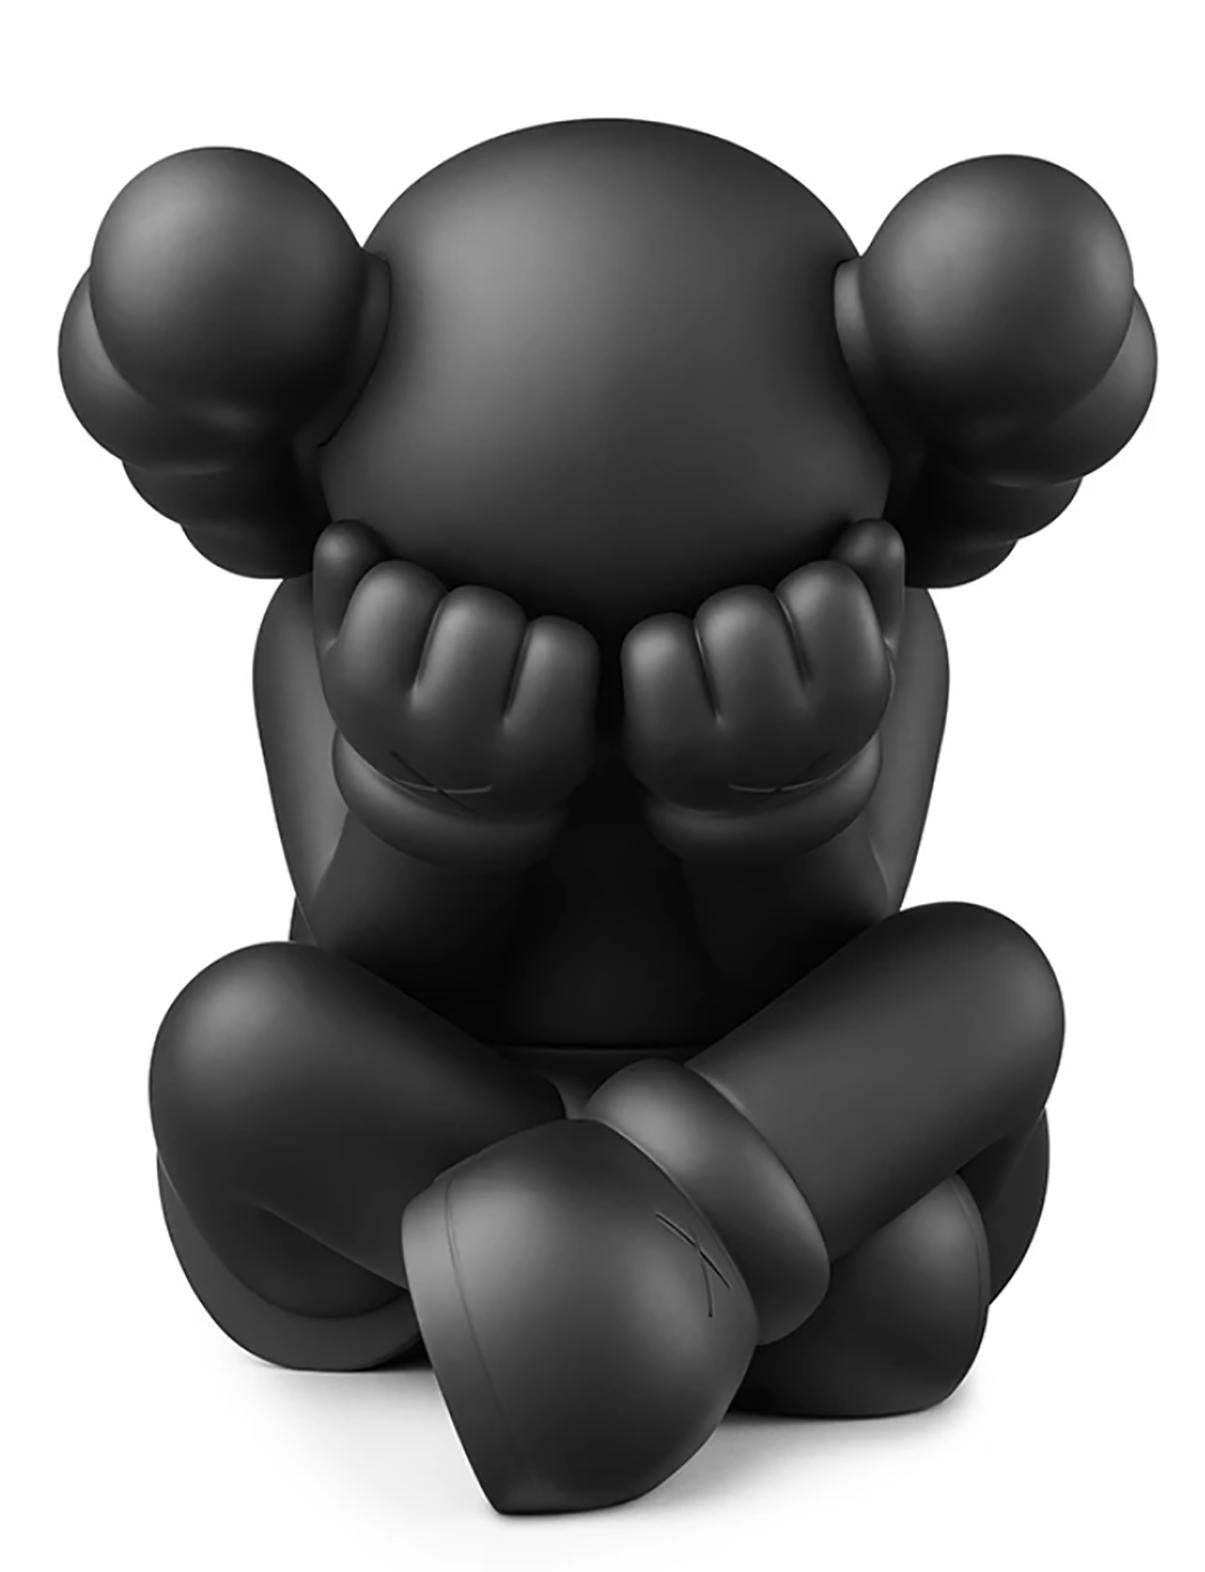 KAWS SEPARATED complete set of 3 works (KAWS Separated set)  For Sale 2